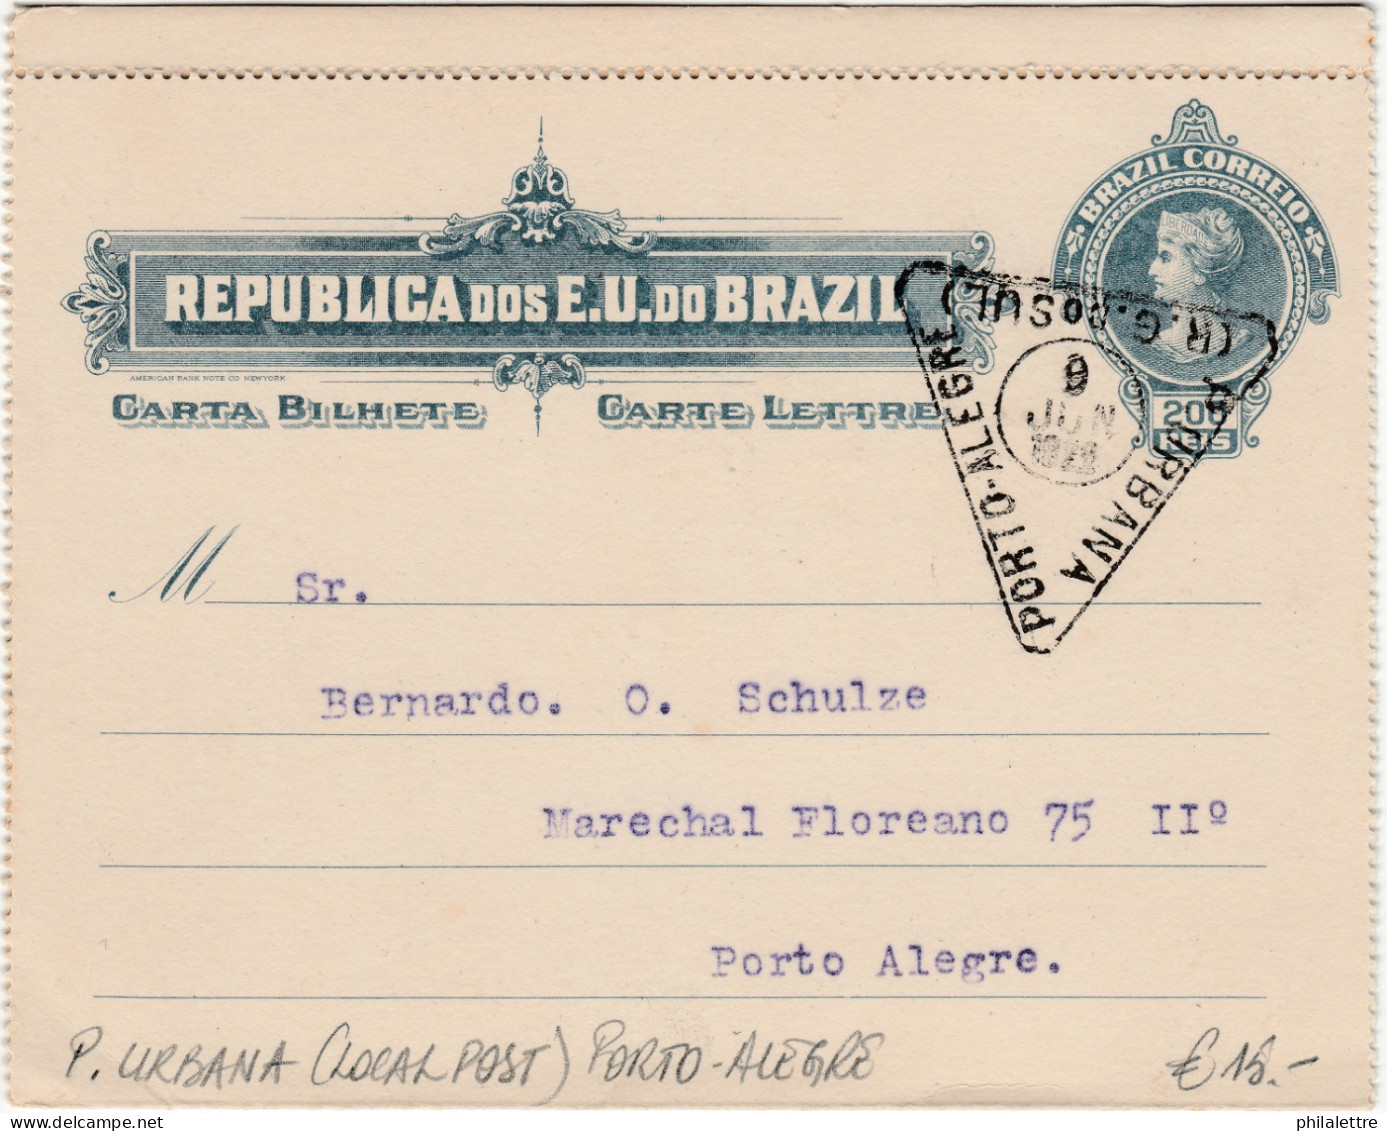 BRAZIL 1922 200 Reis Letter-Card Used In PORTO-ALEGRE Cancelled "P. URBANA" (City Post) - Lettres & Documents